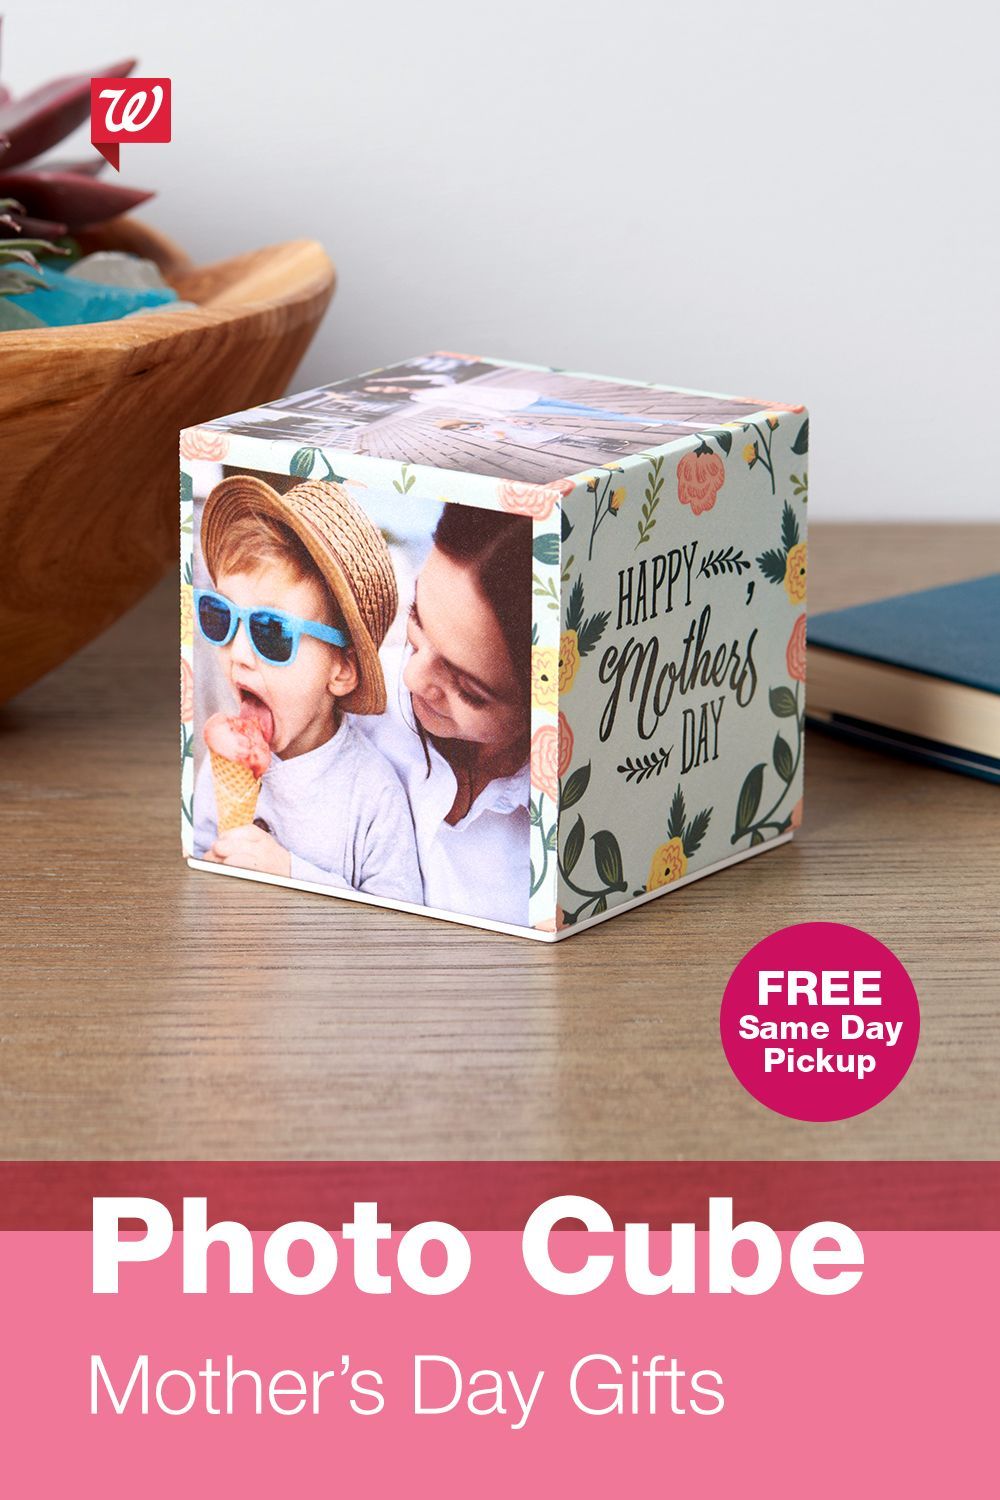 Mother’s Day gift idea: Print her favorite mom moments on a Photo Cube. Skip the wait—have it in your hands today with FREE Same Day Pickup. -   22 knitting and crochet Projects mom
 ideas